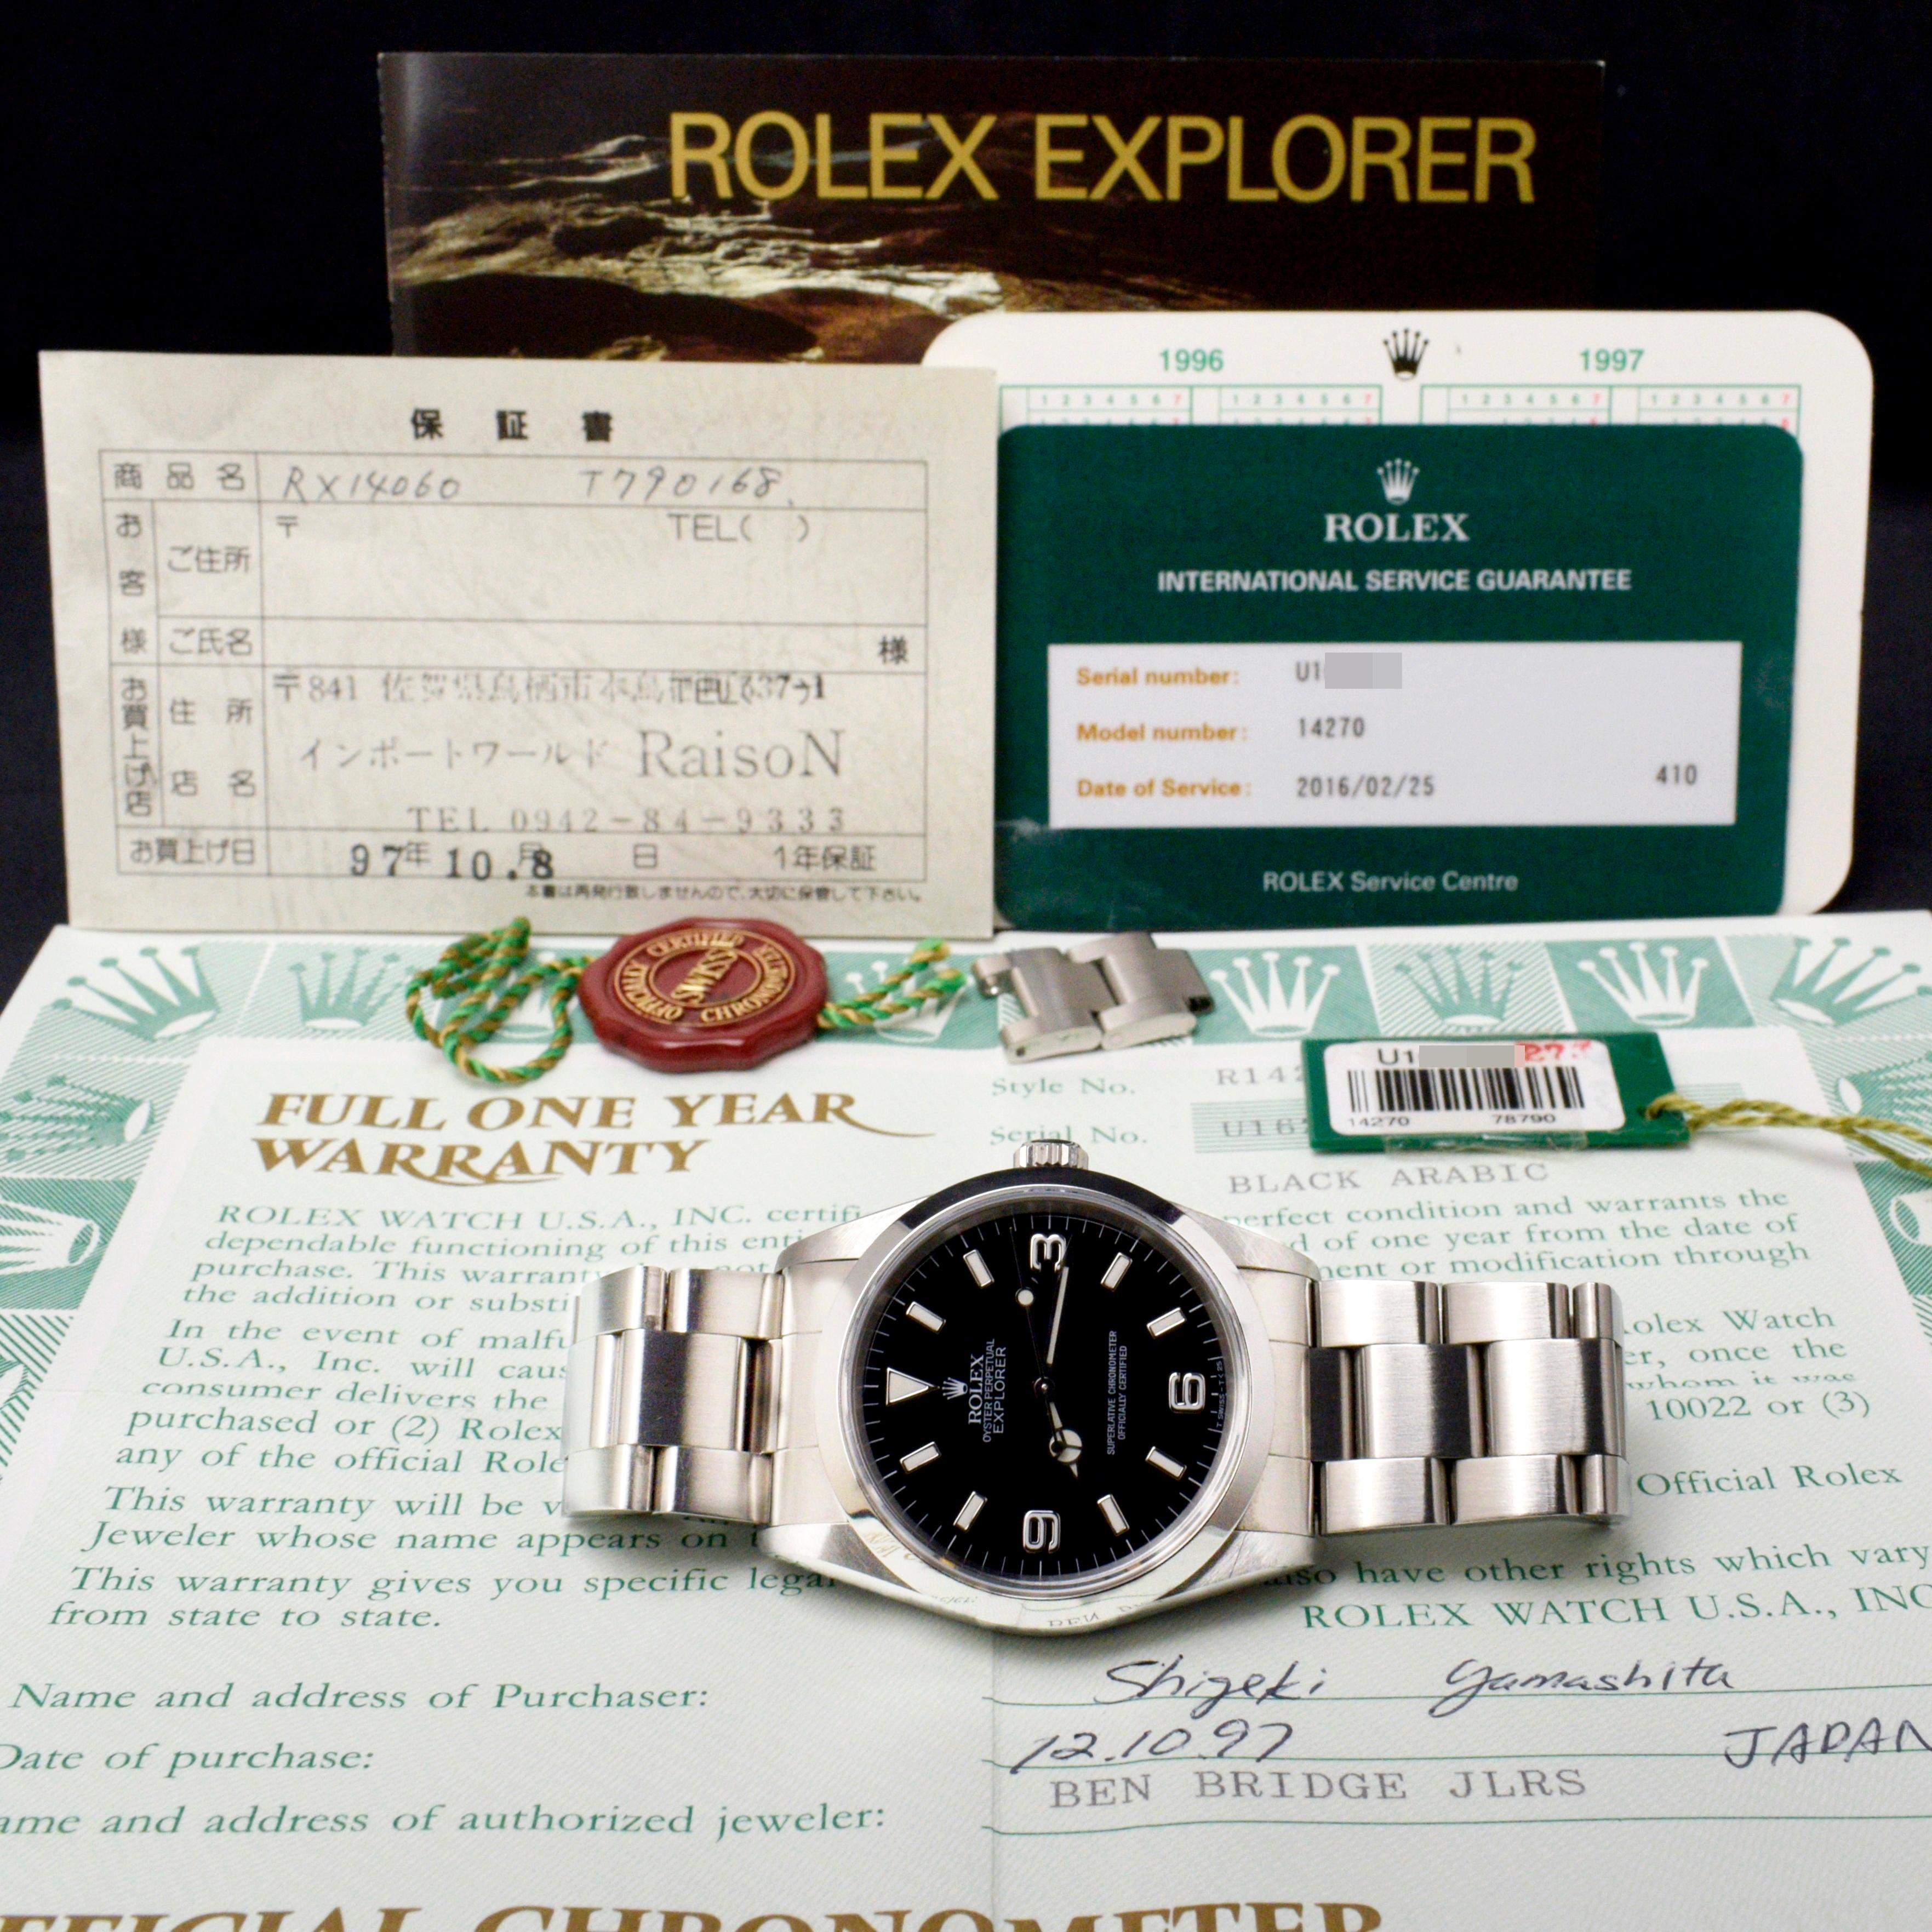 Brand: Rolex
Model: 14270
Year: 1997
Serial number: U1xxxxx
Reference: C03523

Case: Shows sign of wear with slight polish from previous; inner case back stamped 14270

Dial: Excellent Condition black “Swiss-T<25” dial w/ matching hands

Bracelet: